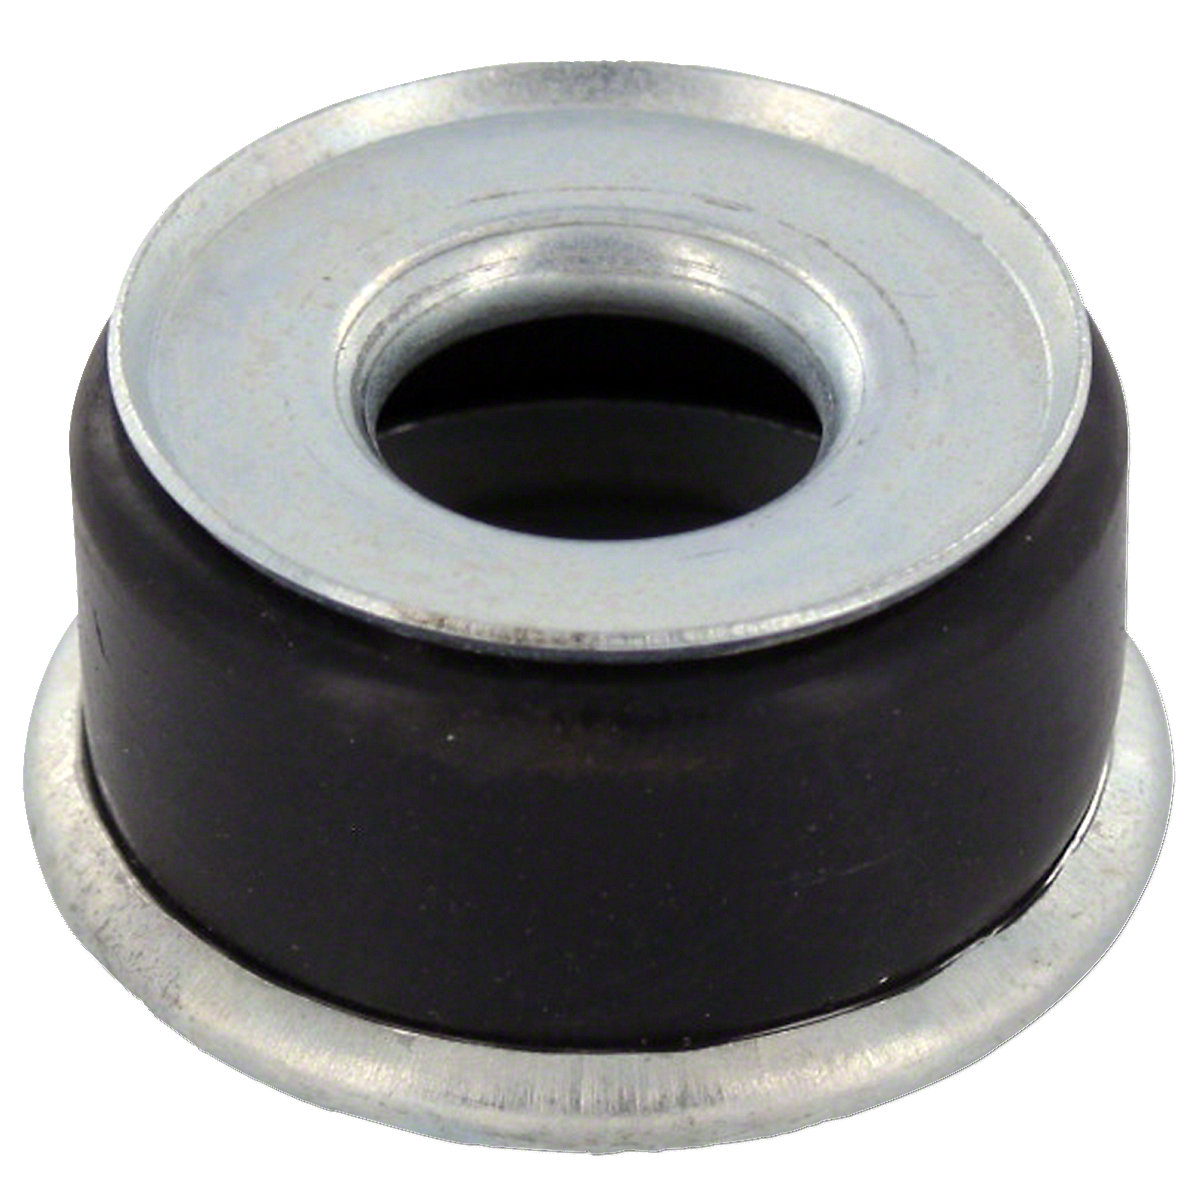 Rear Tie Rod Ball Joint Dust Cover For Massey Ferguson: TEA20, TO20, TO30, TO35, 135, 230, 235, 245.